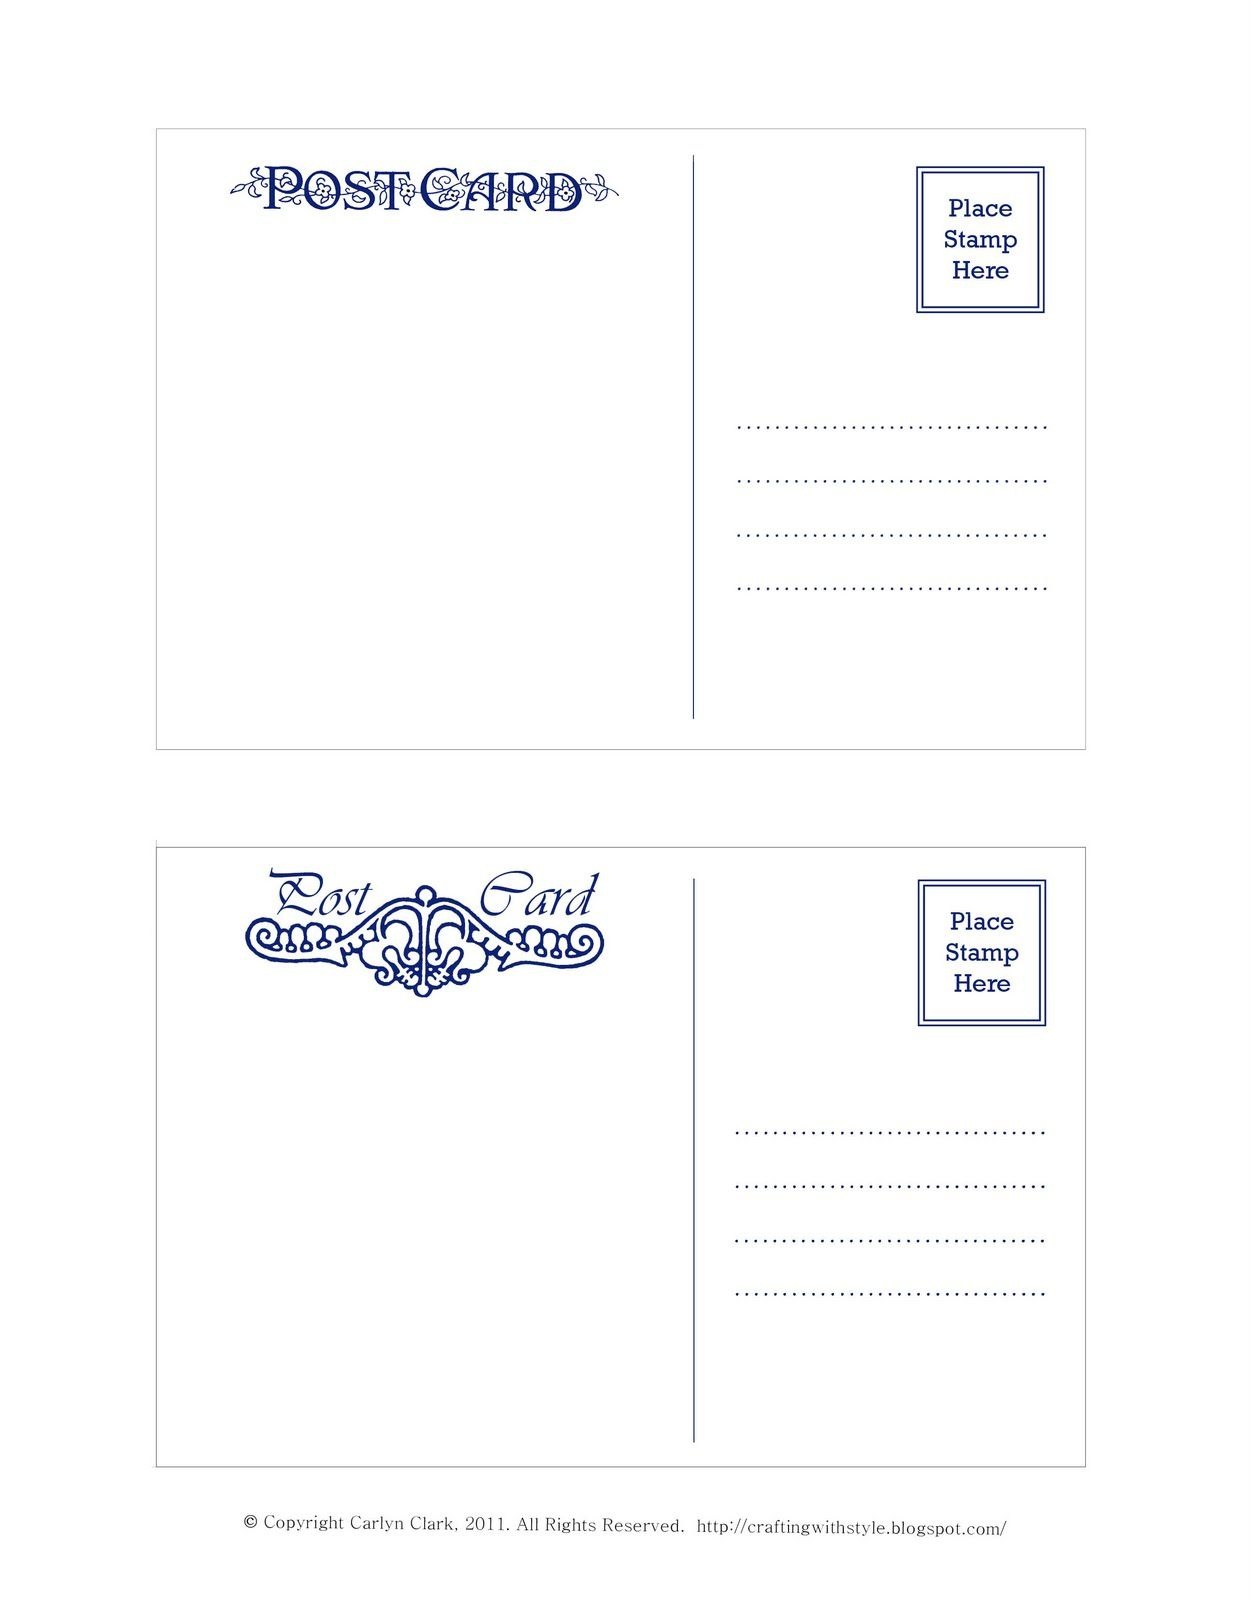 Crafting With Style: Free Postcard Templates | Postcards | Postcard - Free Printable Postcard Invitations Template